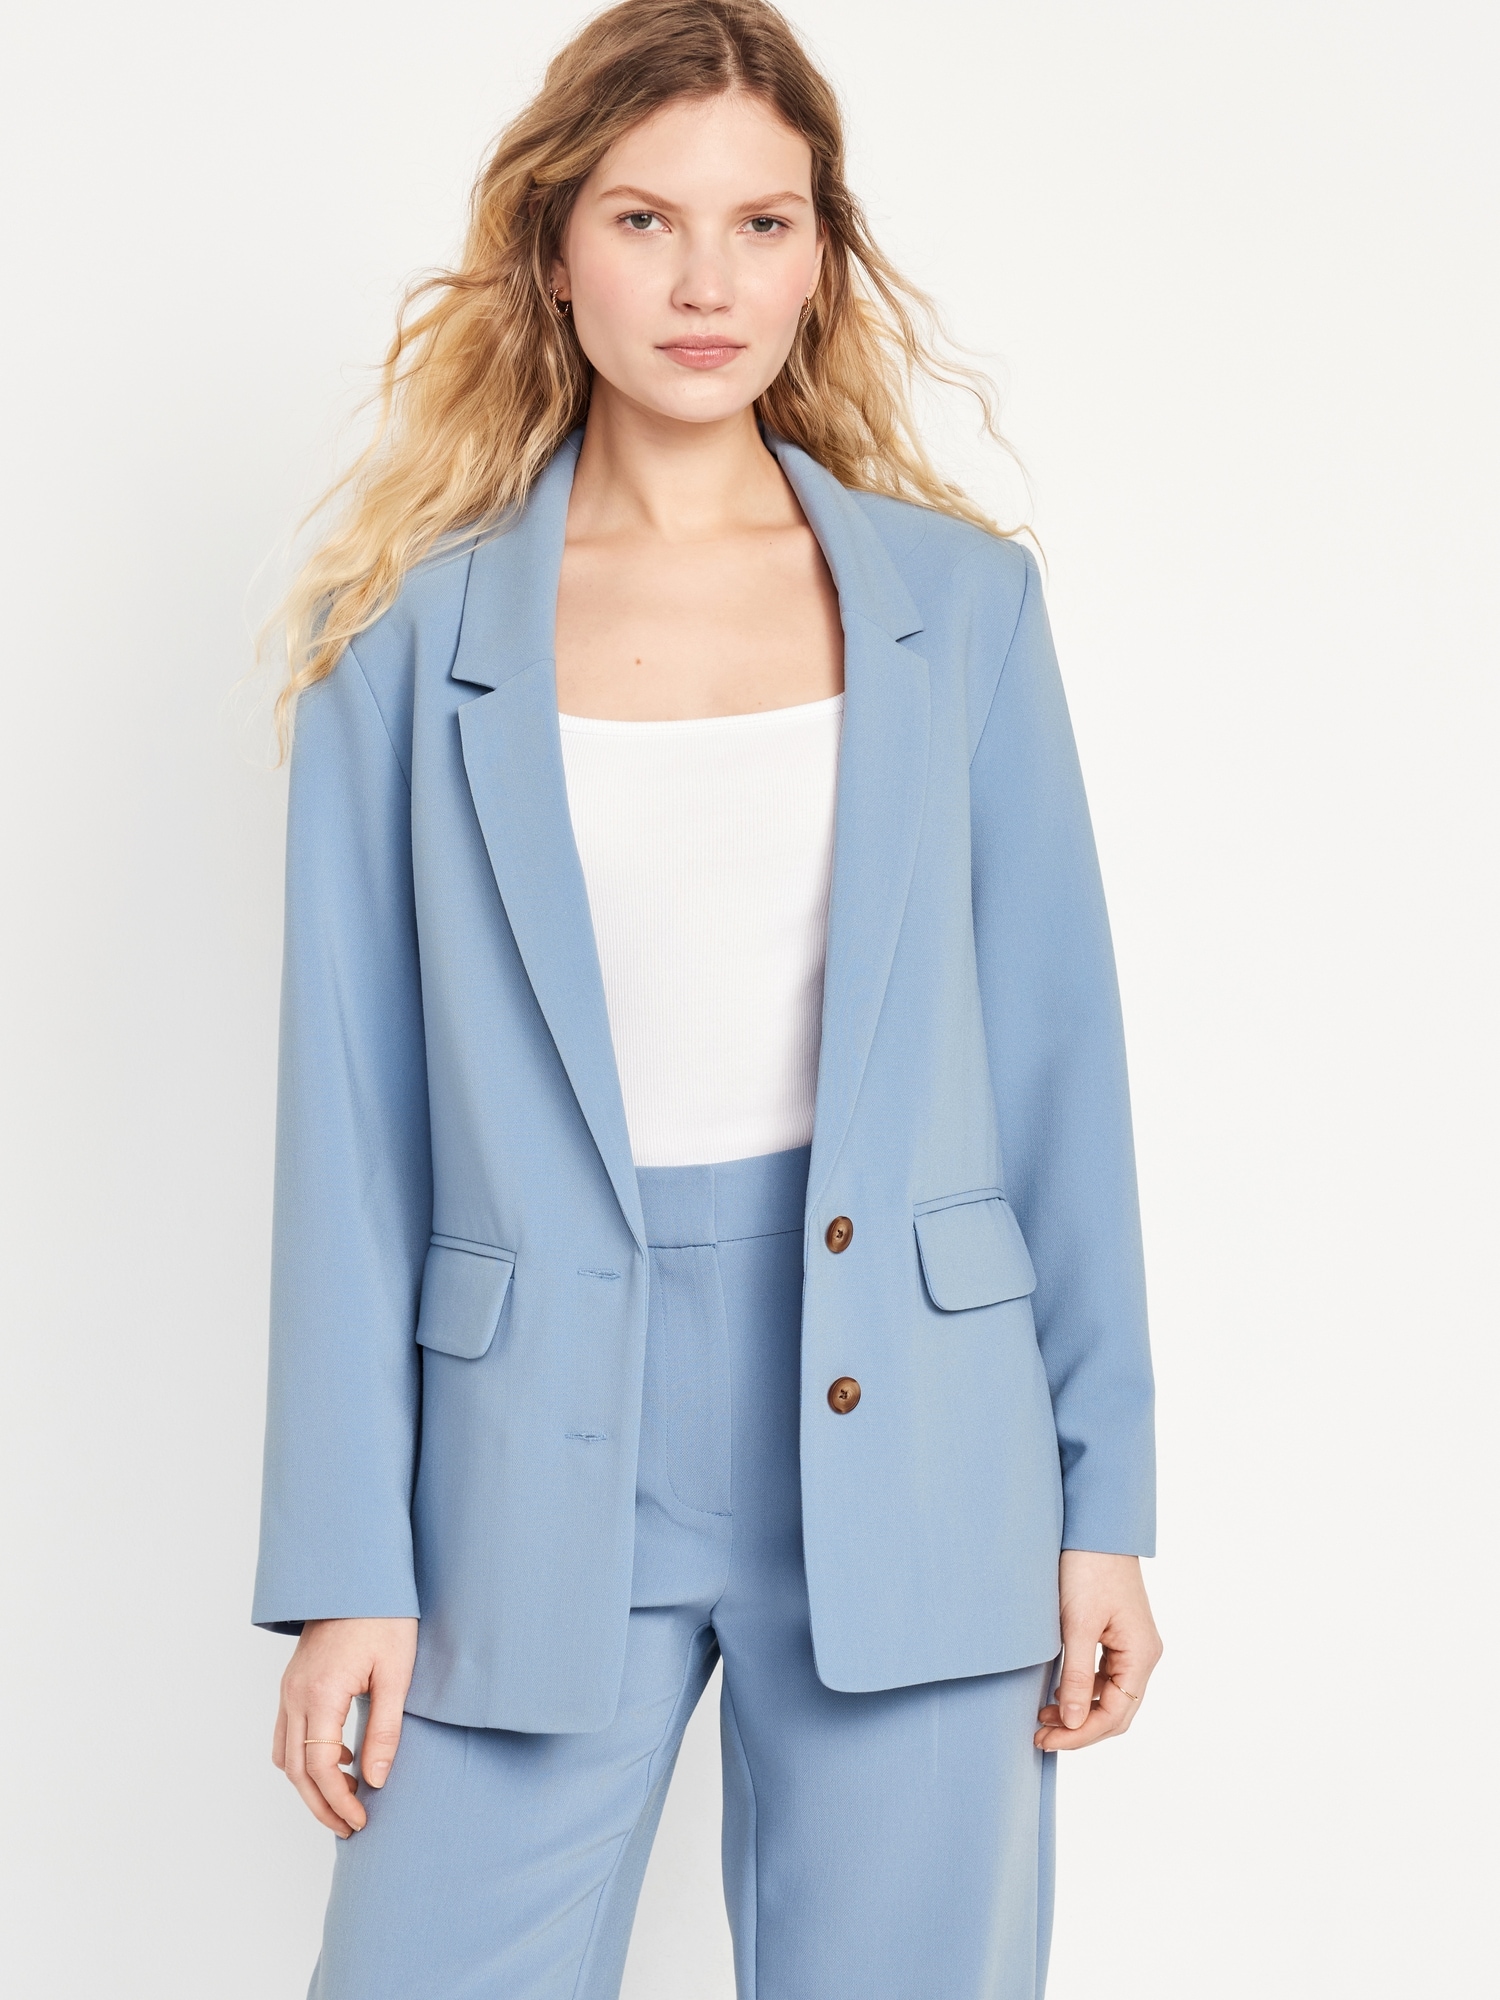 Women's Blazers with Matching Pants | Old Navy